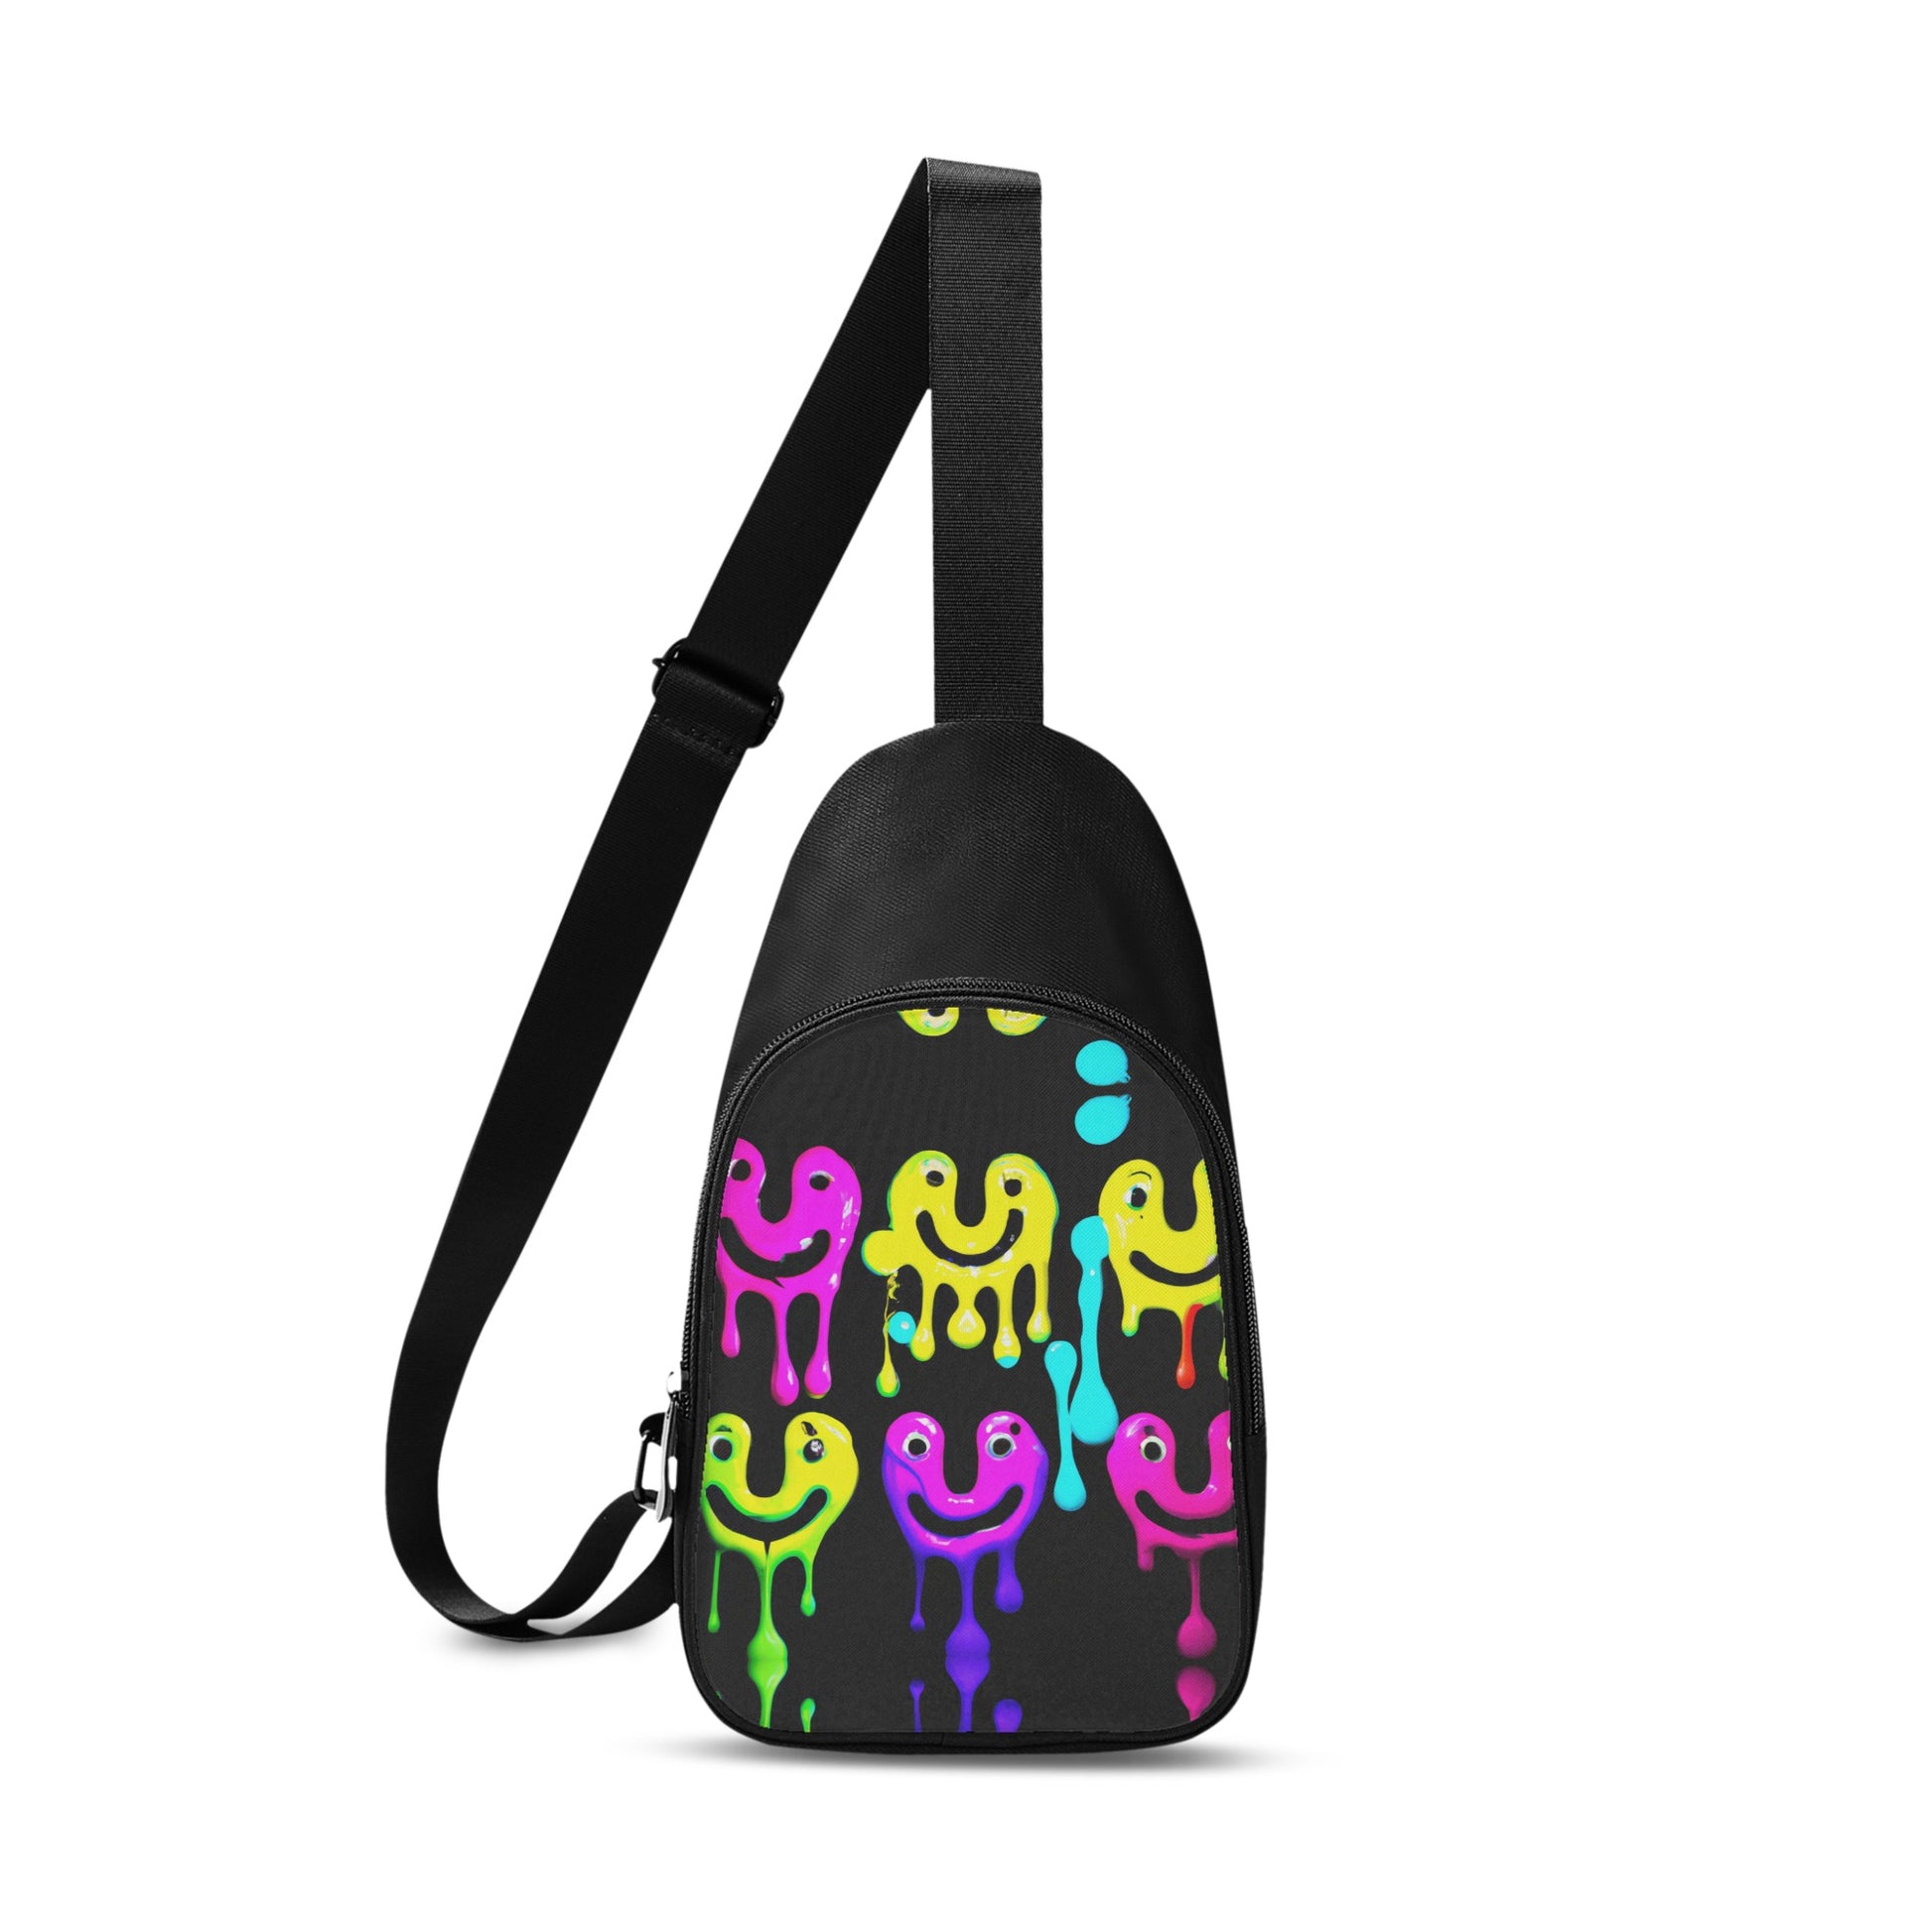 This unisex chest bag has a unique digitally printed design on the front.  The visual features colourful smiley faces that are dripping.   This cross-body bag is a funky addition to your fit rotation.